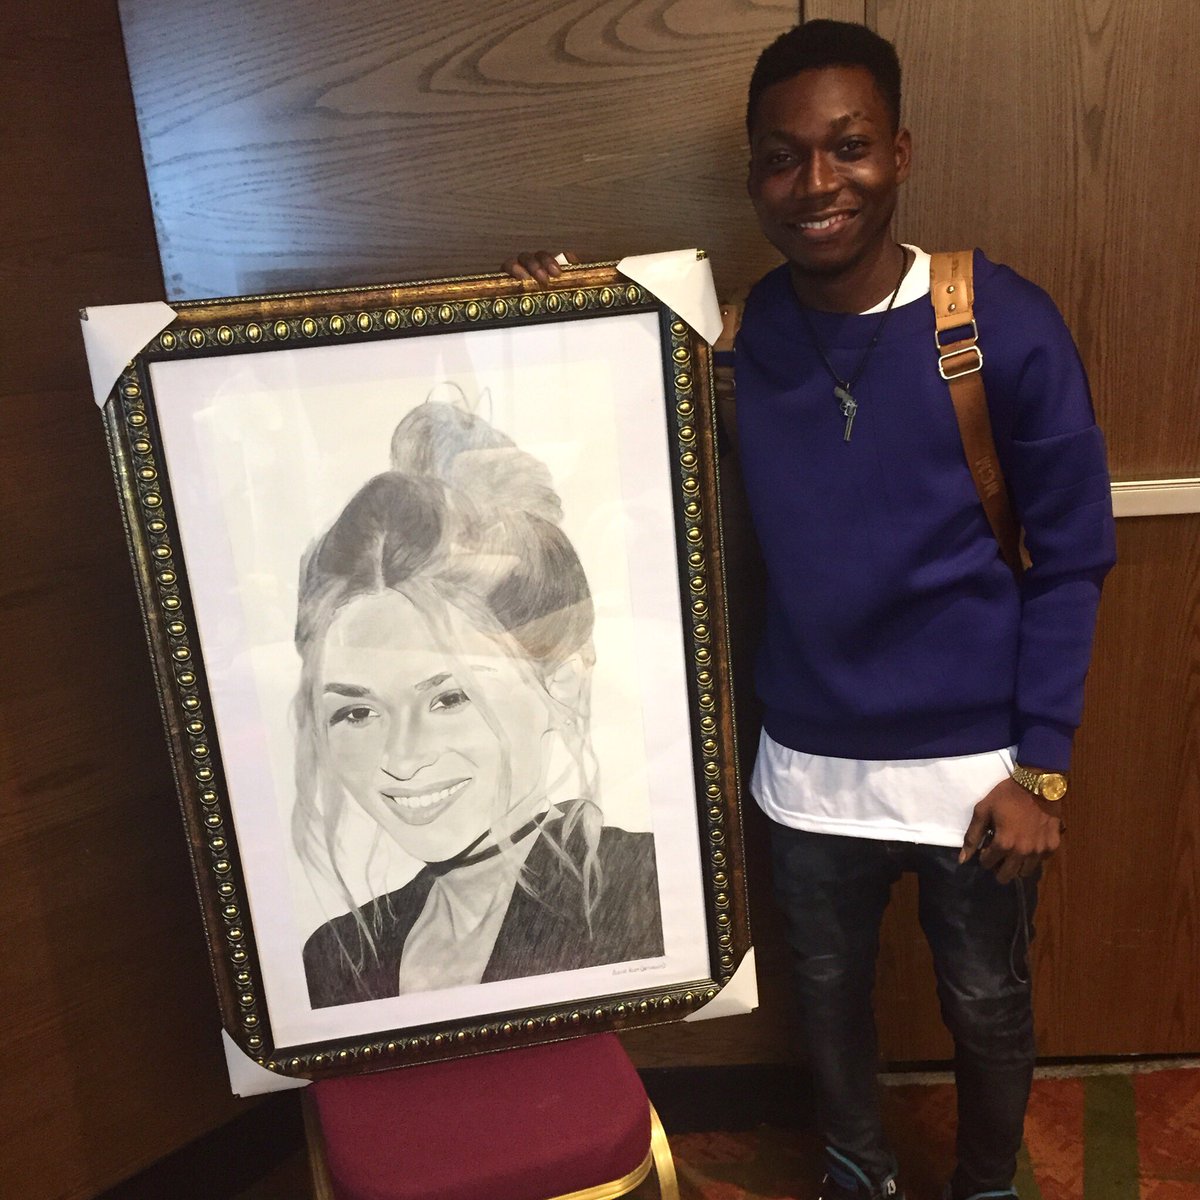 Akeem You Are An Incredible Artist!This Picture You Drew Of Me Is Breathtaking! Grateful For Fans Like You #Nigeria https://t.co/vkLmzpeMve